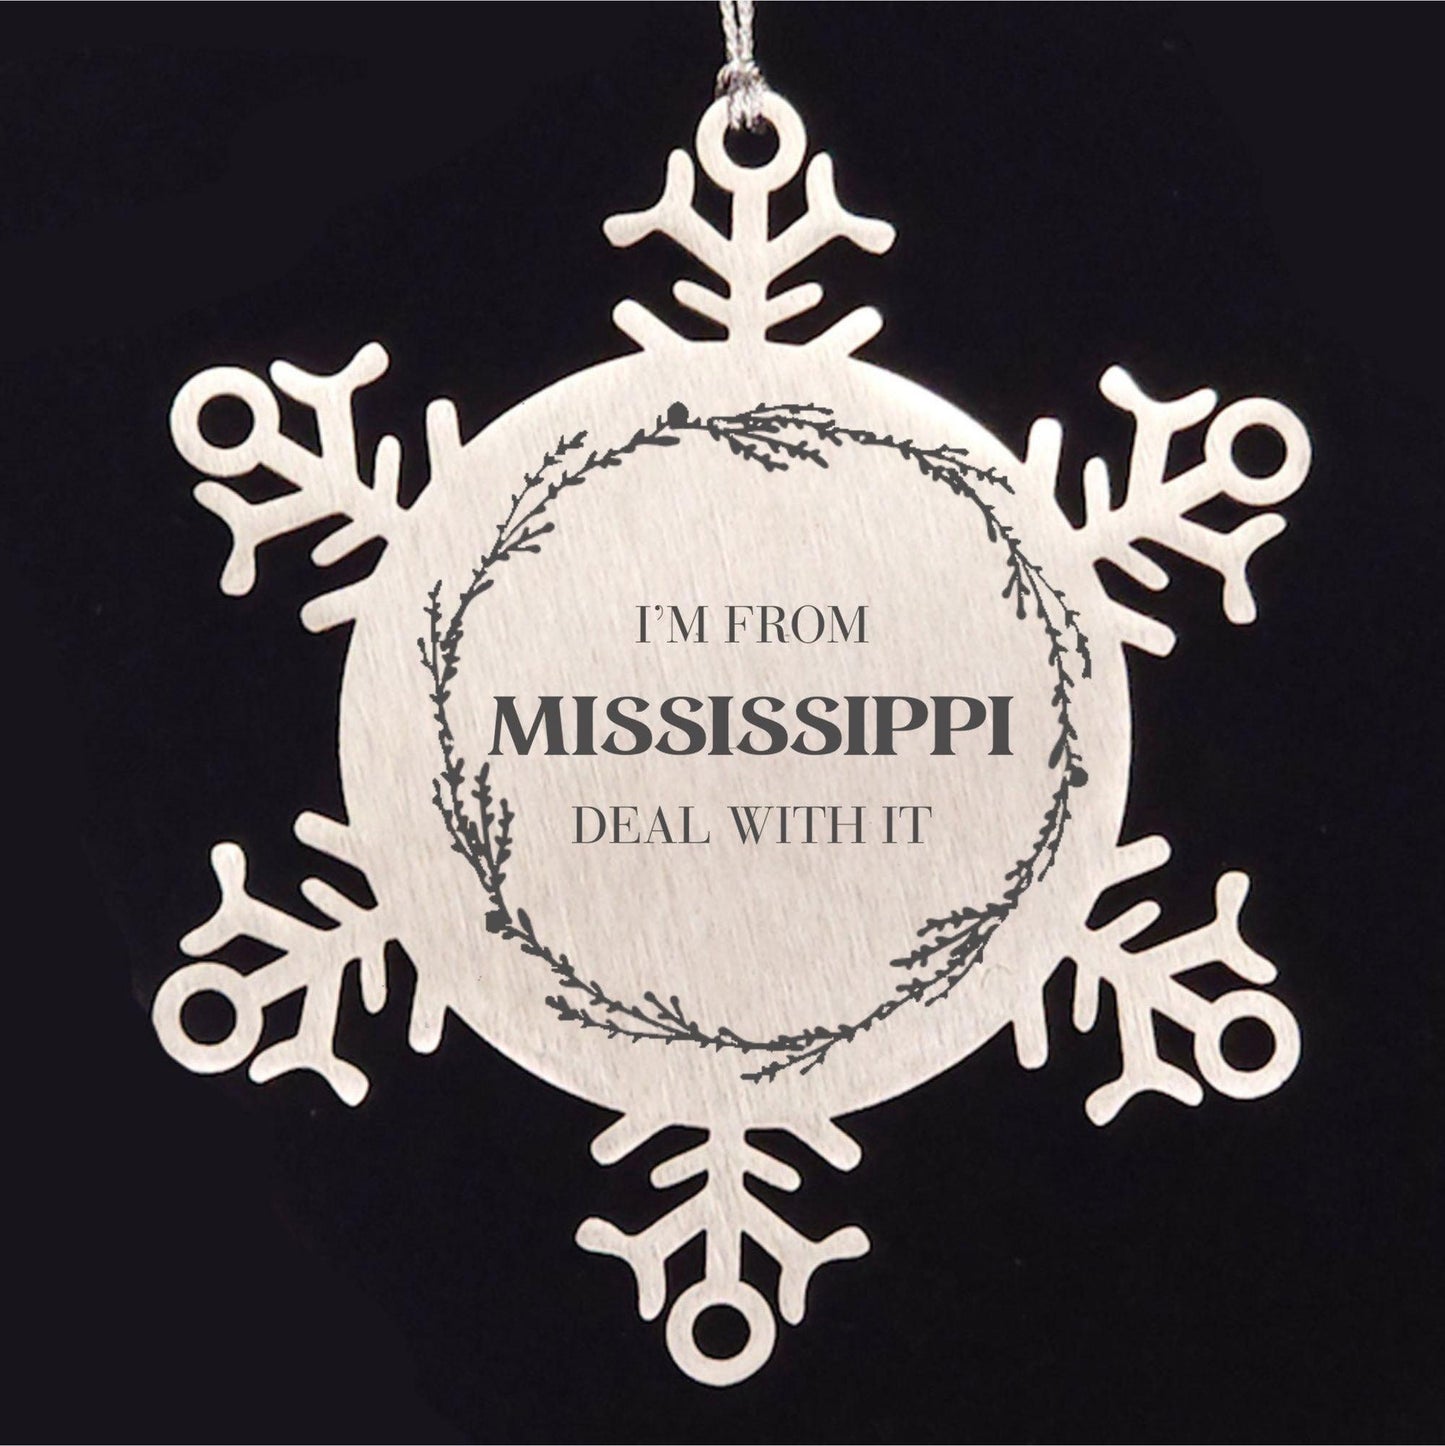 I'm from Mississippi, Deal with it, Proud Mississippi State Ornament Gifts, Mississippi Snowflake Ornament Gift Idea, Christmas Gifts for Mississippi People, Coworkers, Colleague - Mallard Moon Gift Shop